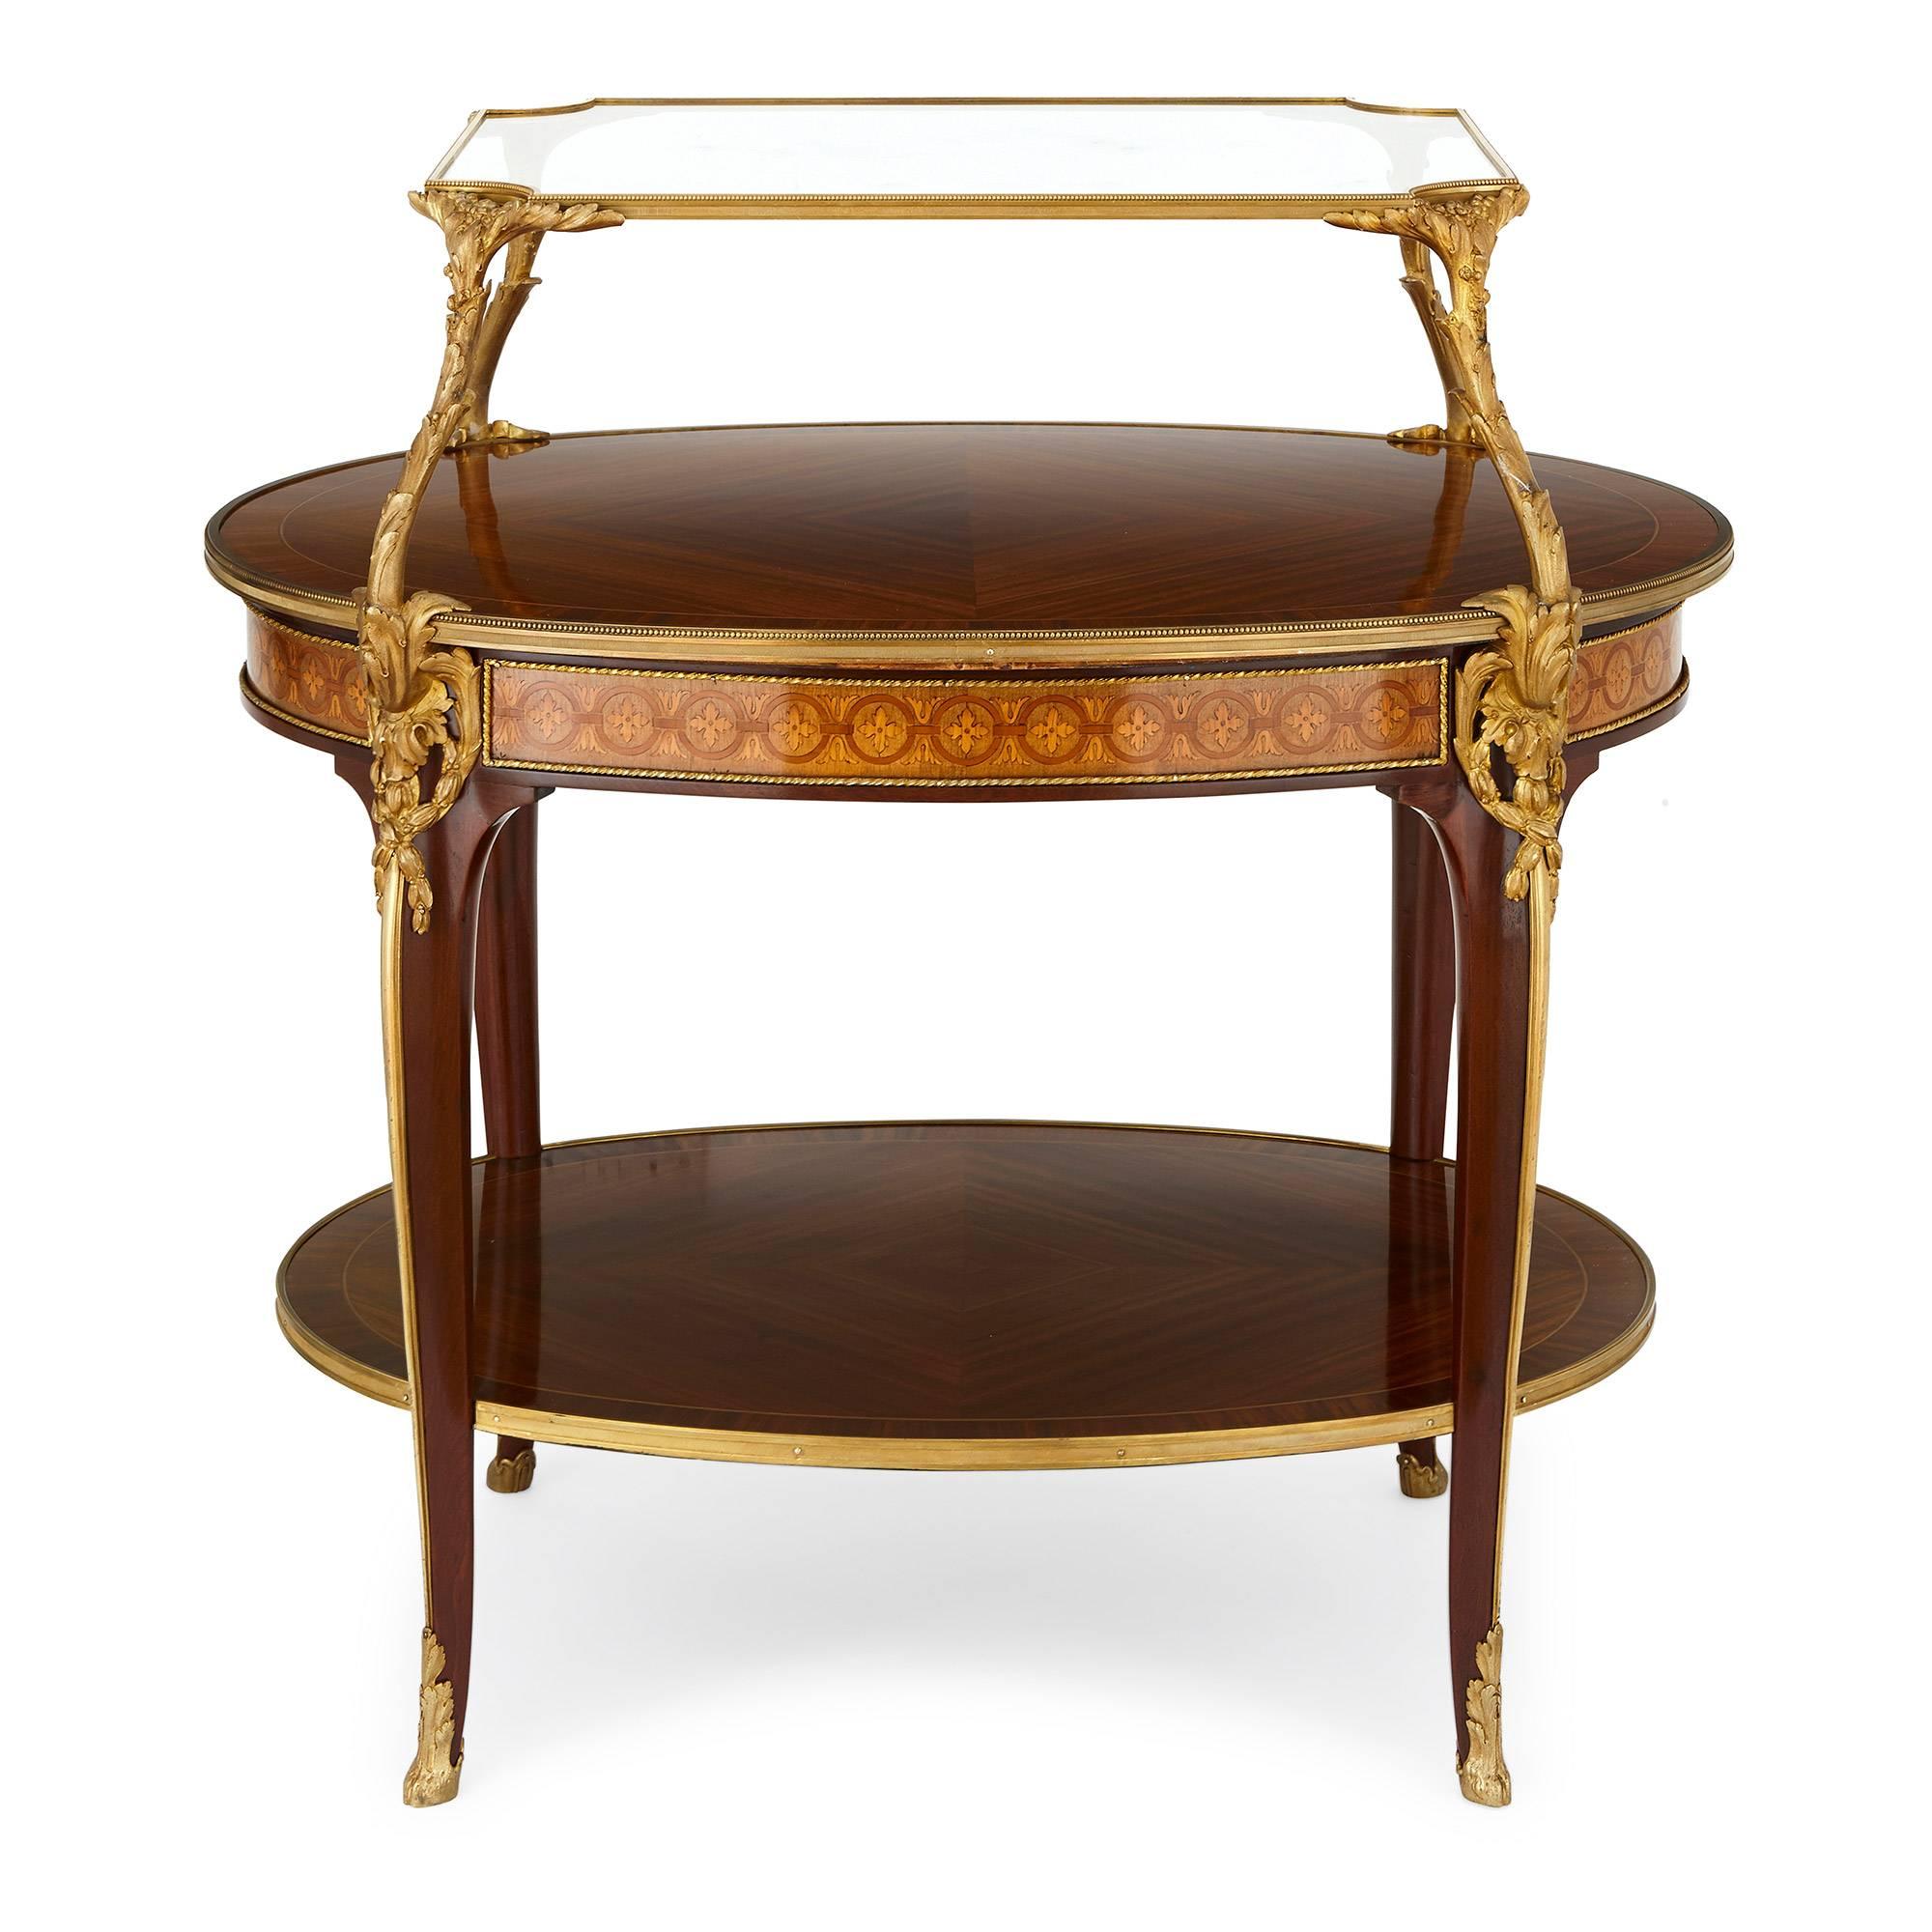 This fine satinwood tea table is made by the highly celebrated Parisian cabinetmaker Francois Linke (French, 1855-1946). The table features a glass tray of rectangular shape which sits upon ormolu supports in acathus leaf form, which themselves are